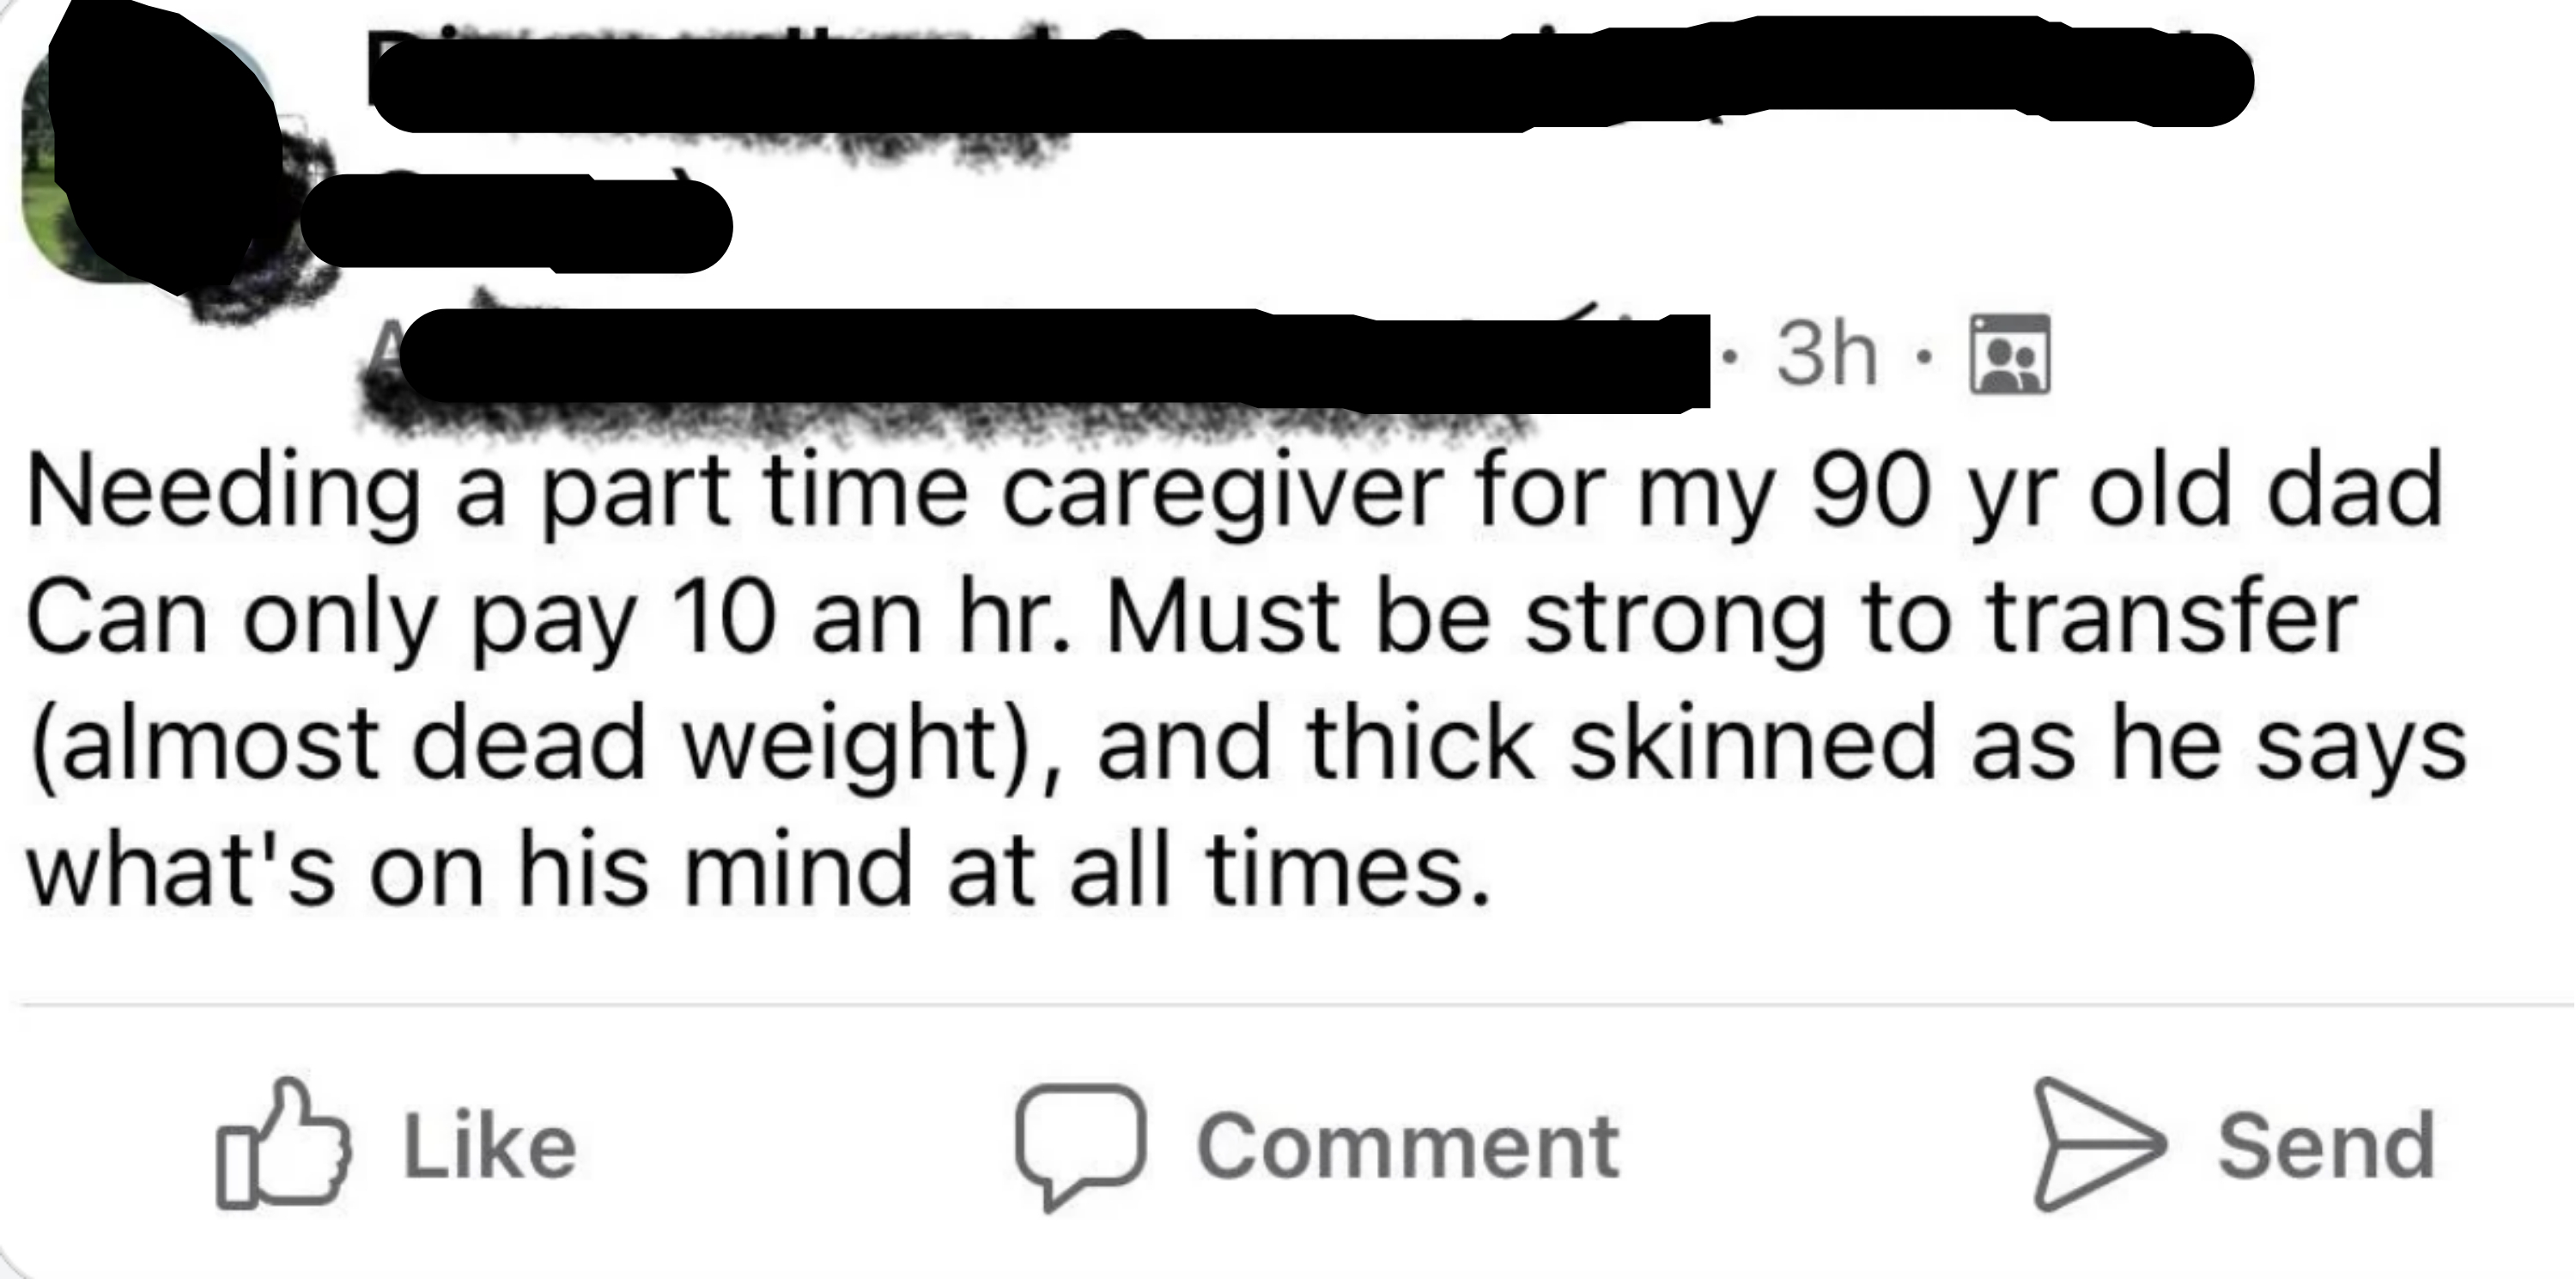 Someone requests a caregiver for their 90-year-old dad. The request says applicants must be strong and must have thick skin, and they only offer pay of $10 an hour